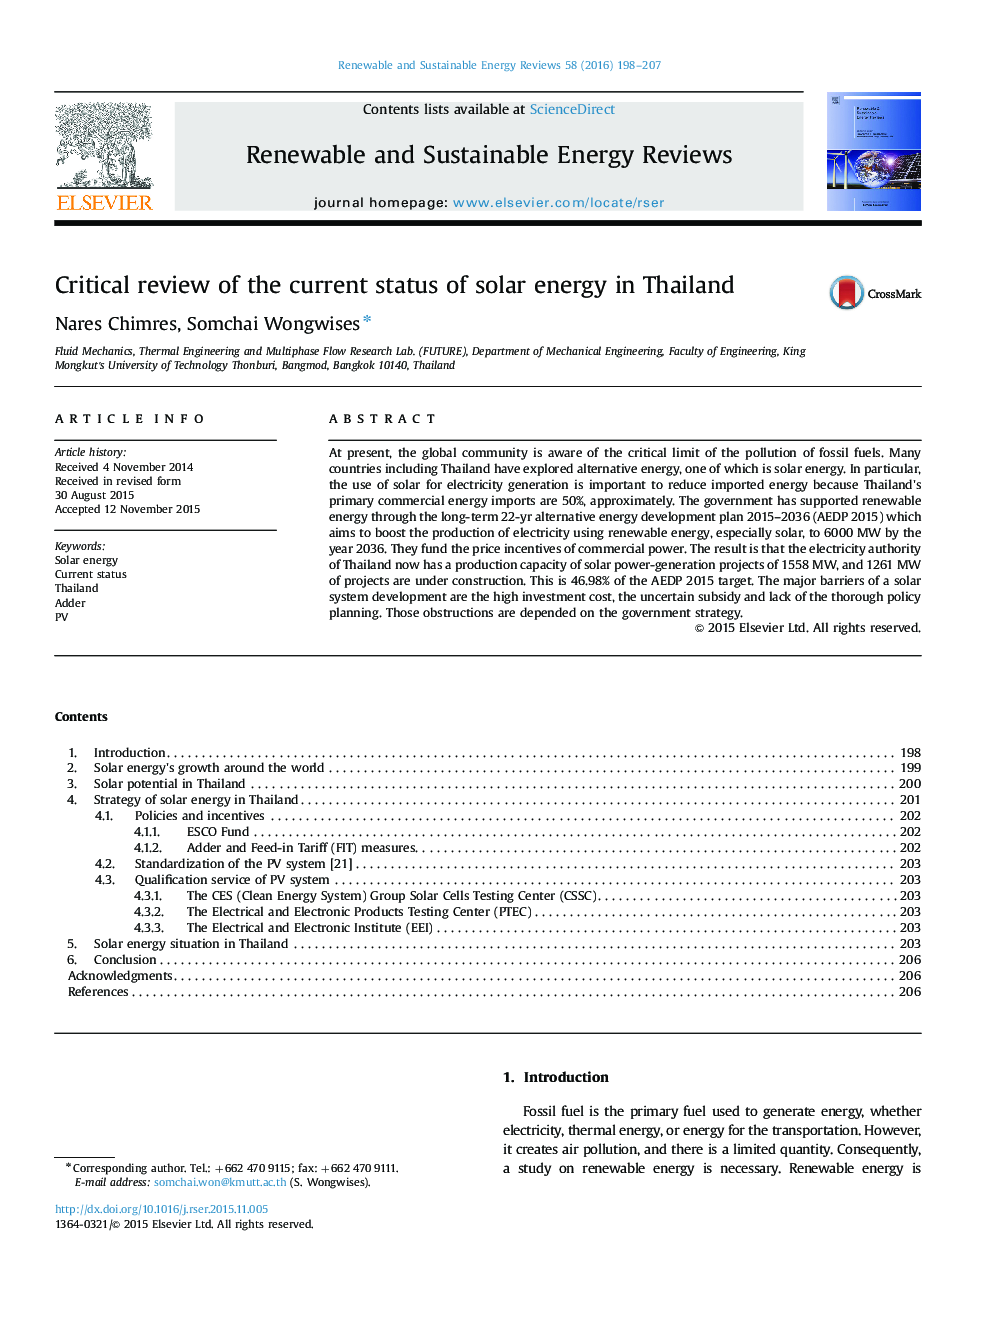 Critical review of the current status of solar energy in Thailand